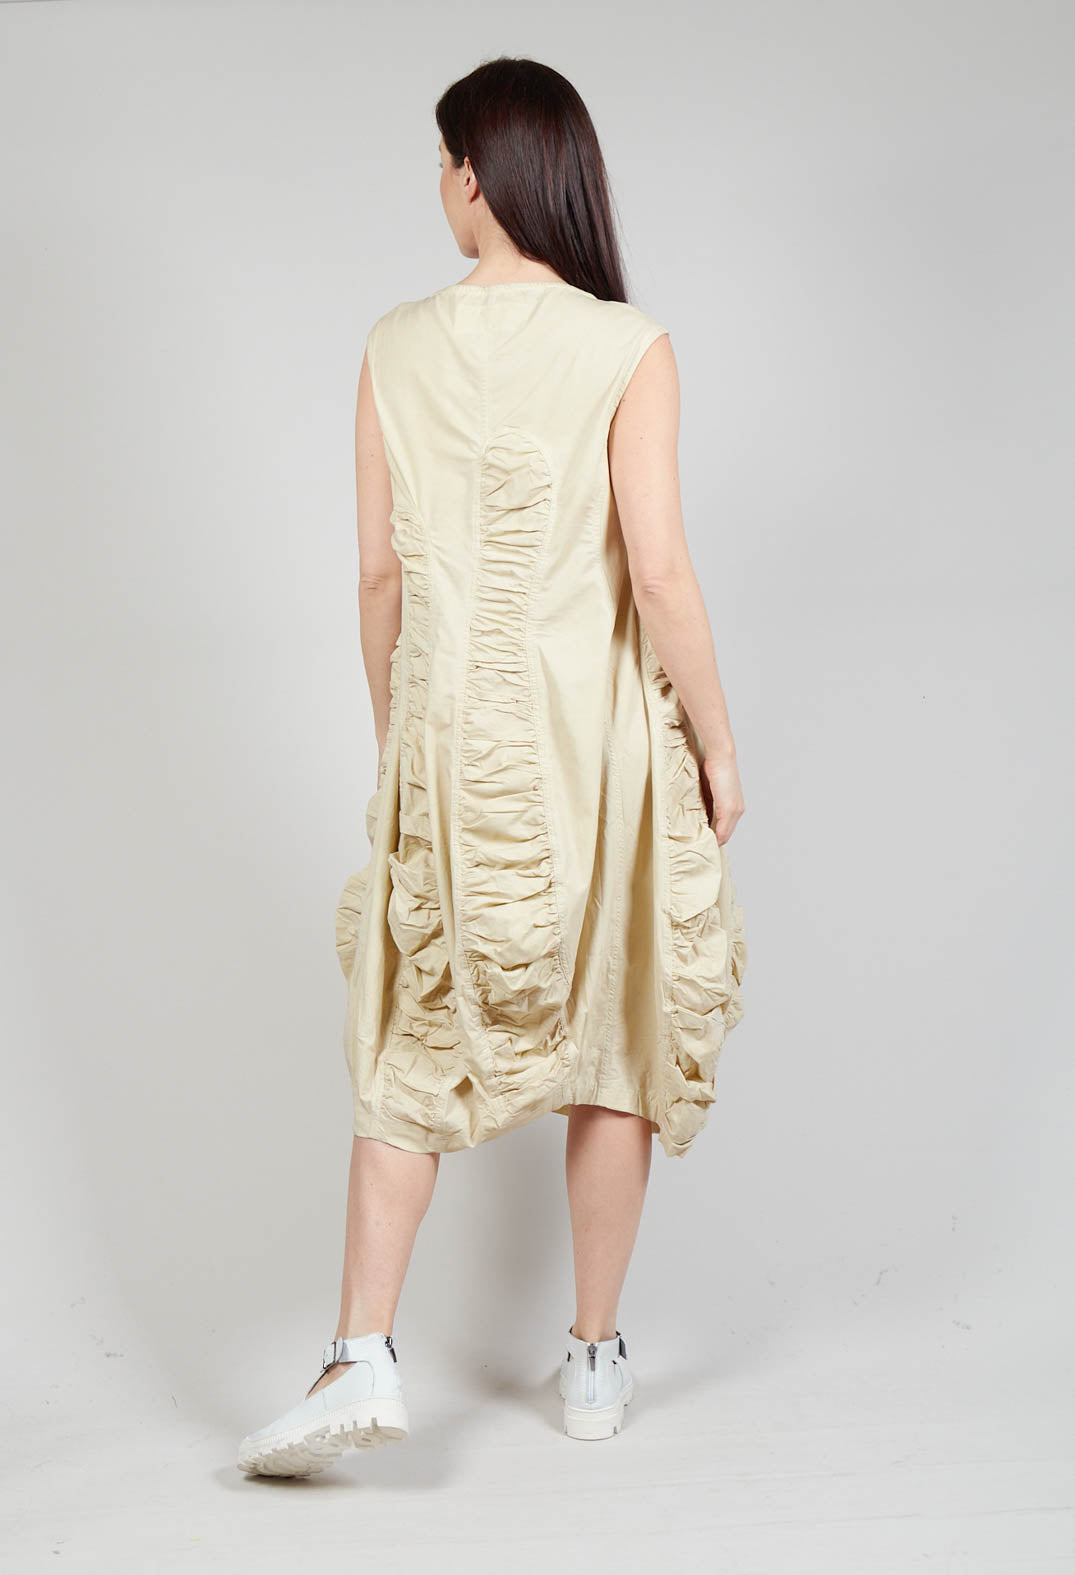 Ruched Dress in Wax Cloud